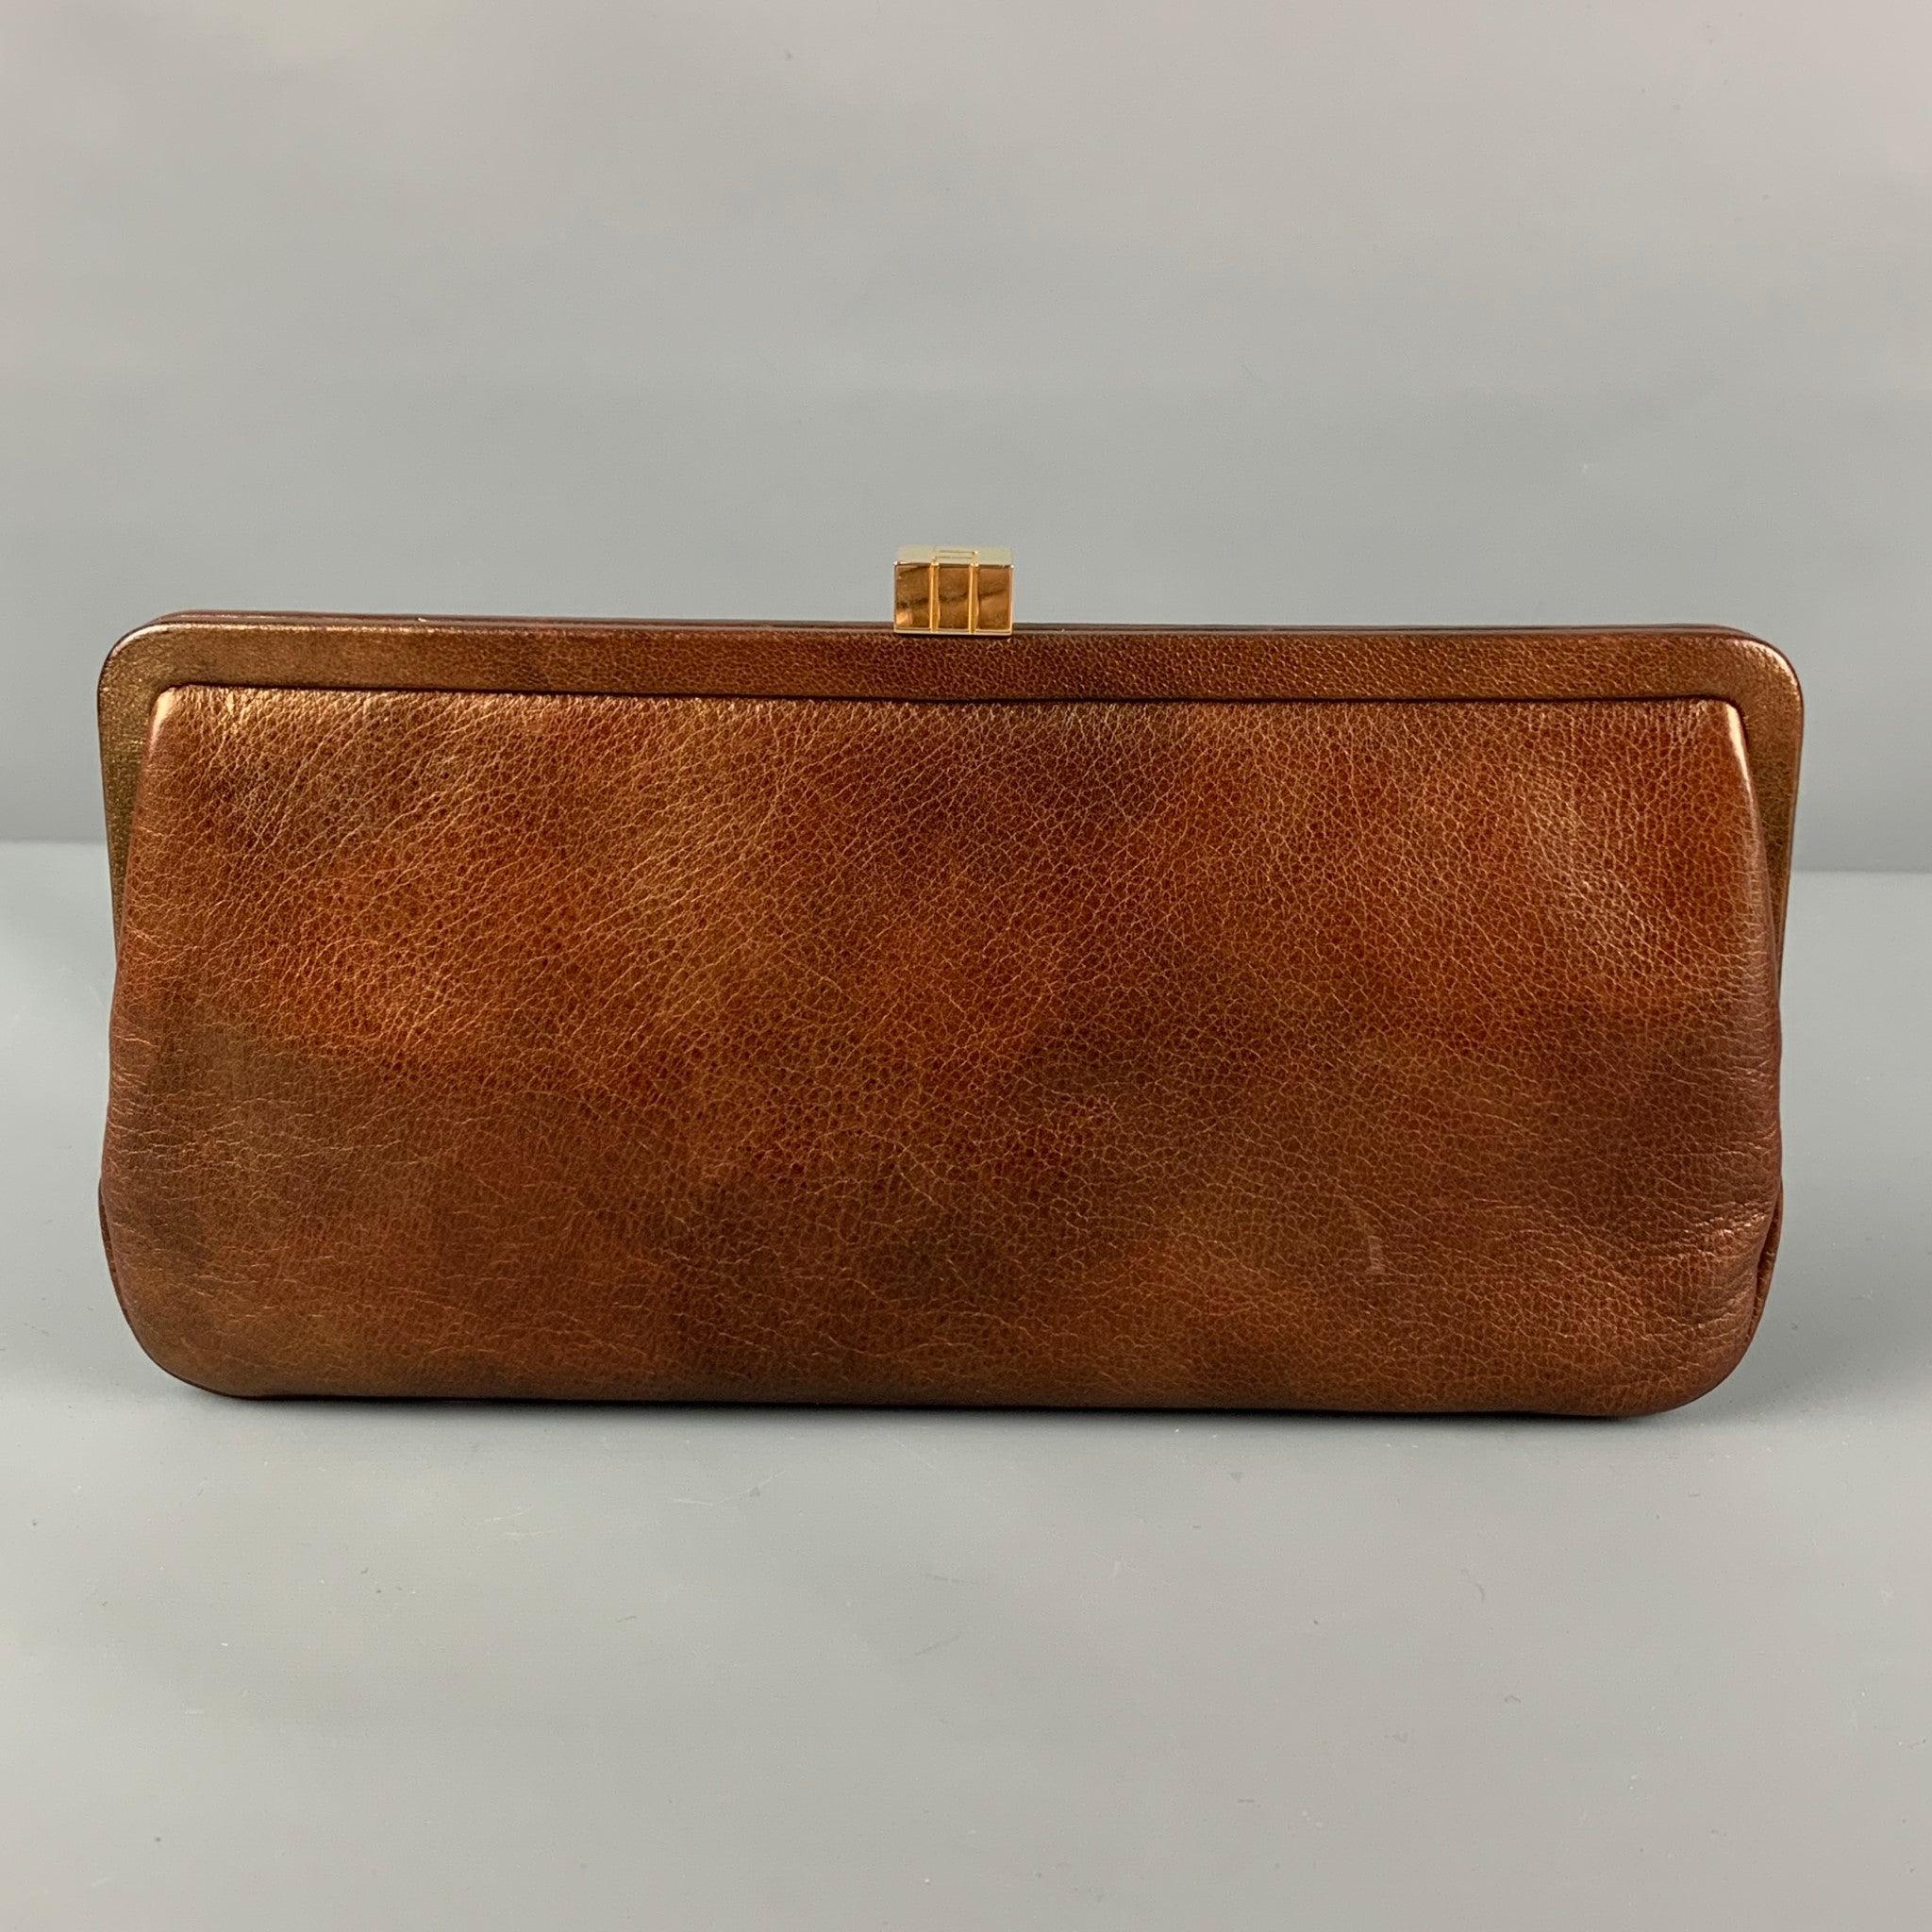 LAMBERTSON TRUEX clutch comes in a brown leather featuring a inner pocket and a push open closure.
Very Good
Pre-Owned Condition. 

Measurements: 
  Length: 9.5 inches  Height: 5 inches  
  
  
 
Reference: 119116
Category: Handbag & Leather